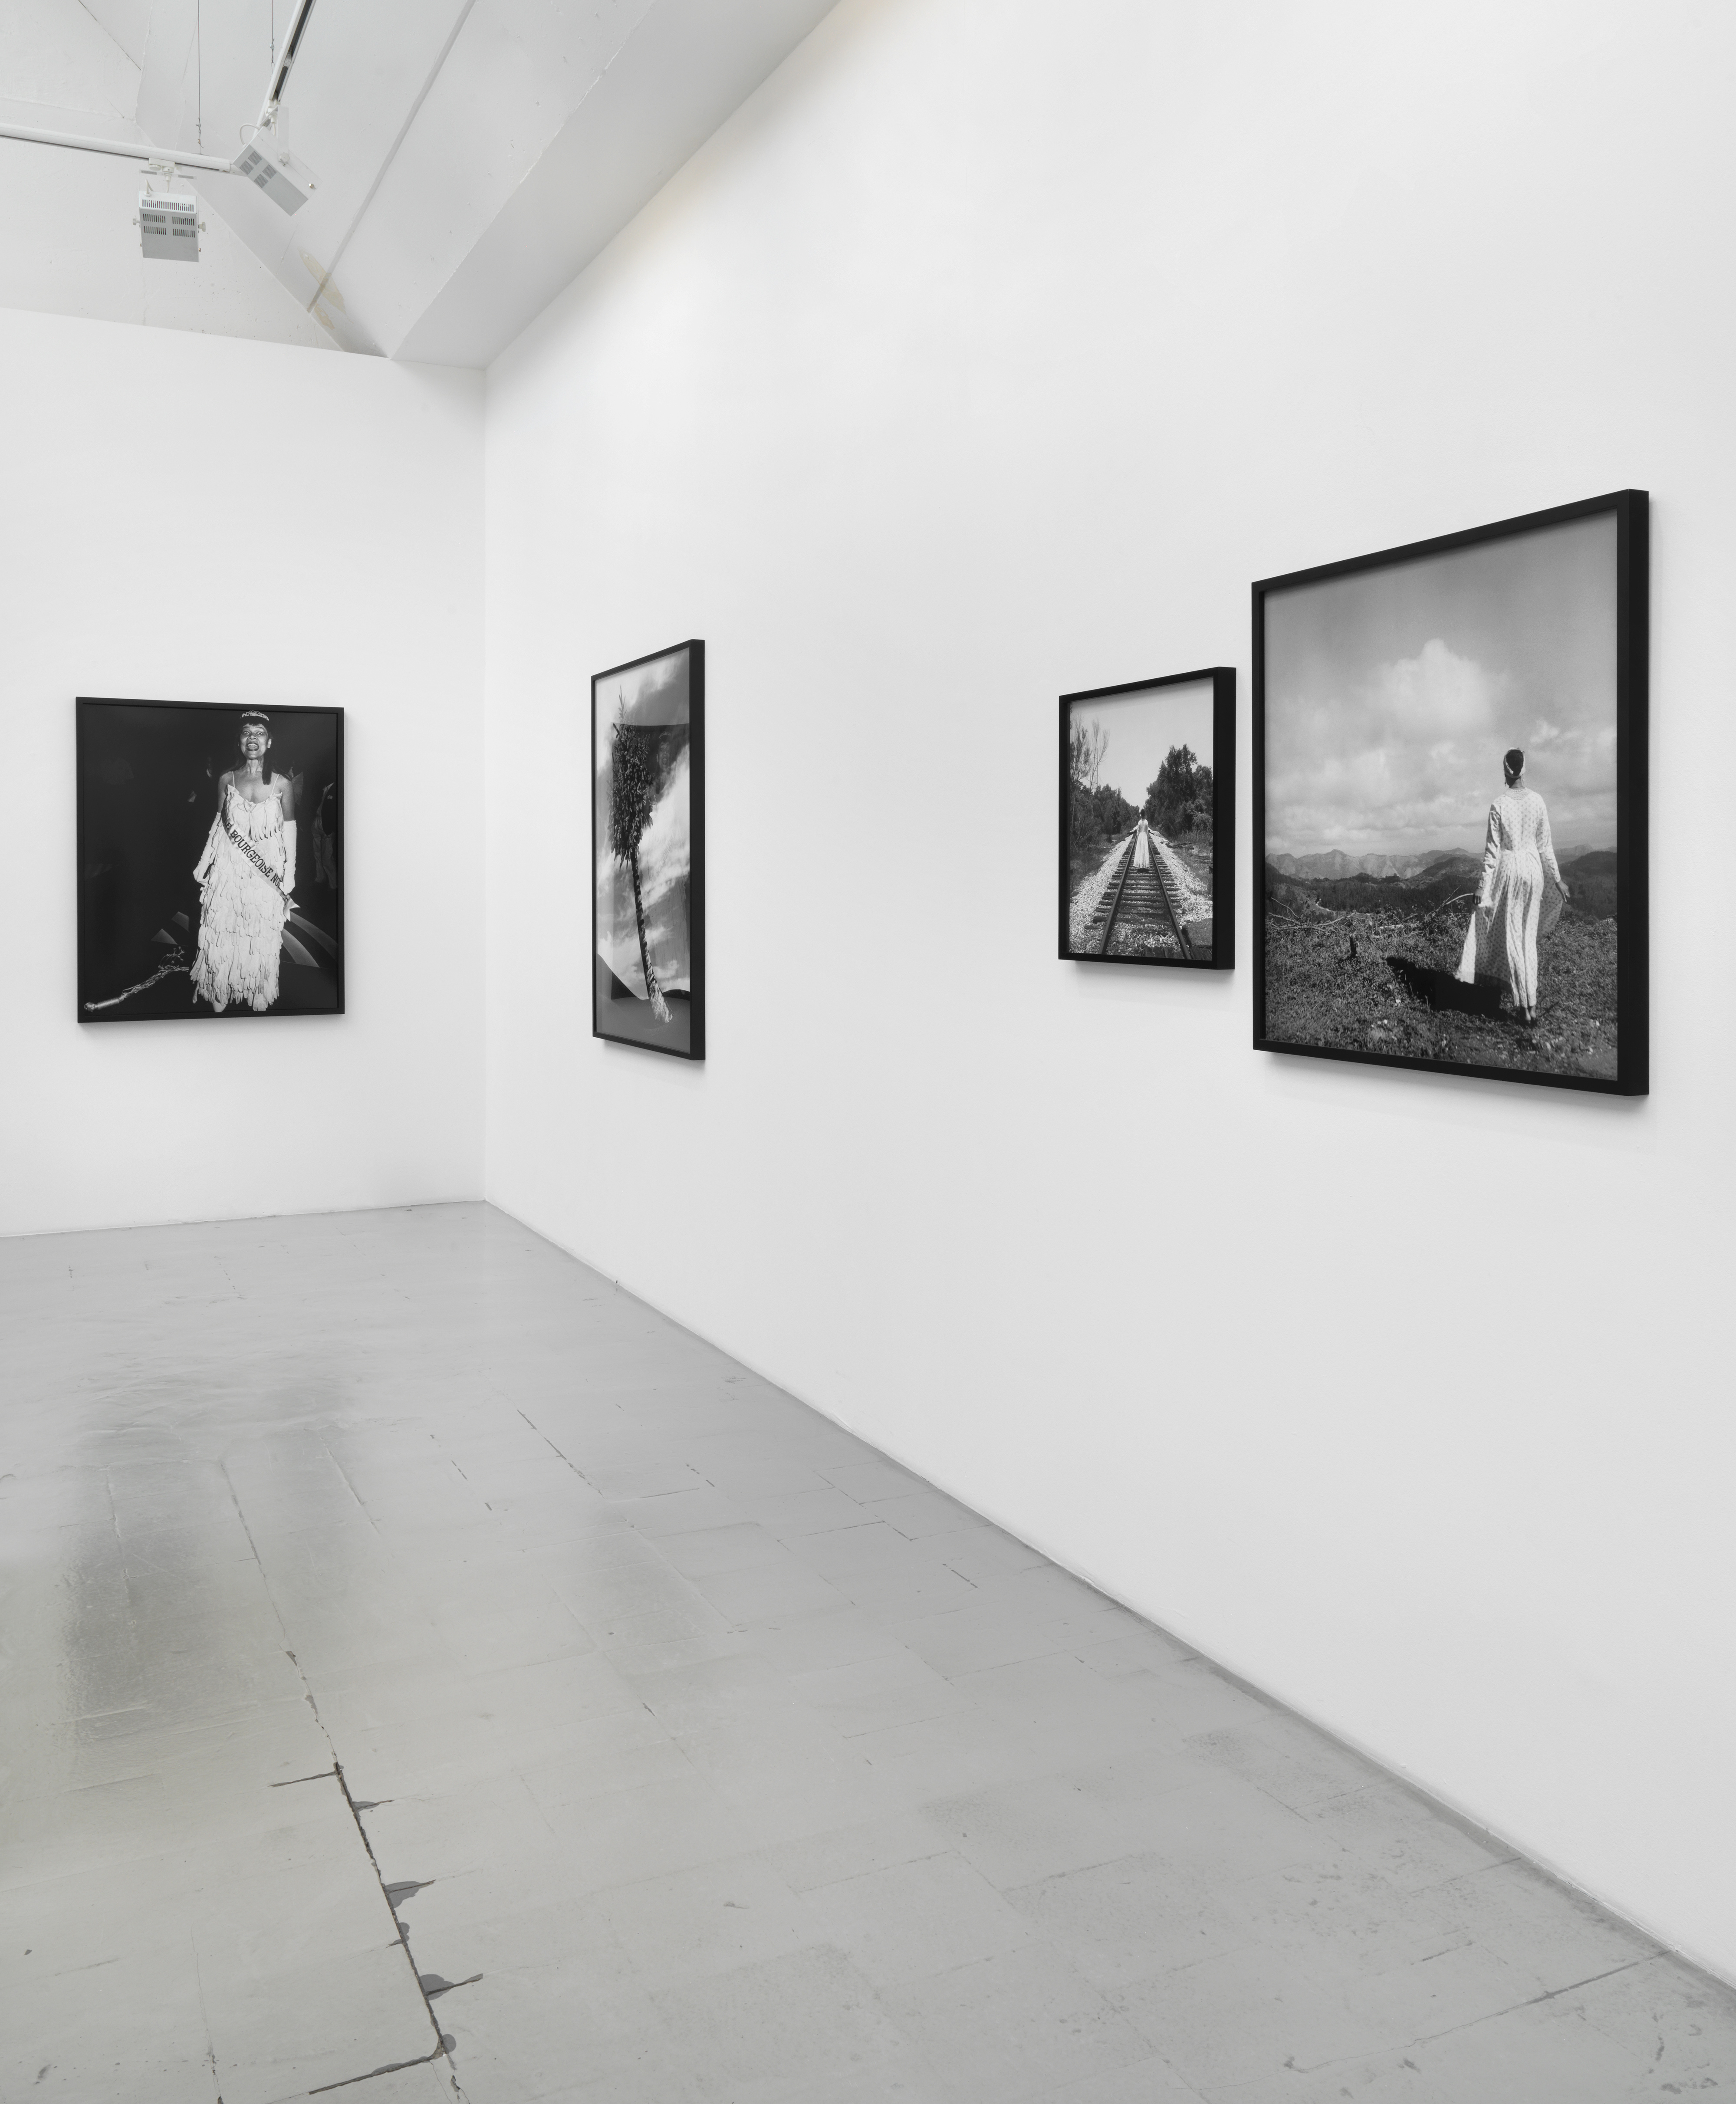 Galerie Barbara Thumm \ Carrie Mae Weems, María Magdalena Campos-Pons &#8211; Black Matters group exhibition